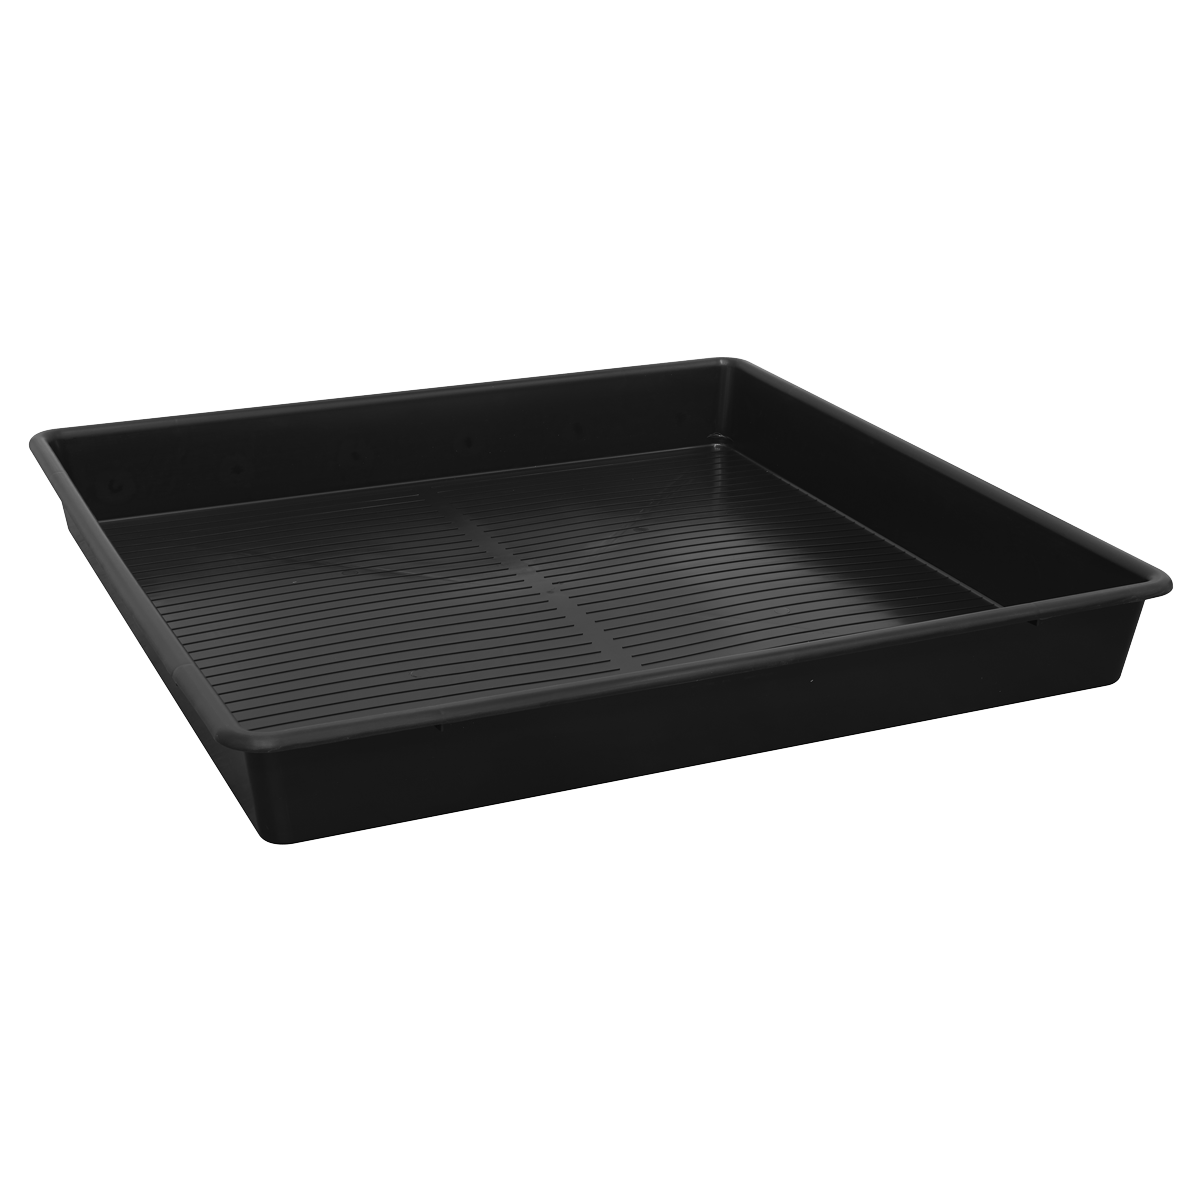 Sealey Drip Tray Low Profile 100L DRPL100
Low profile drip tray manufactured from hard-wearing recycled polypropylene.